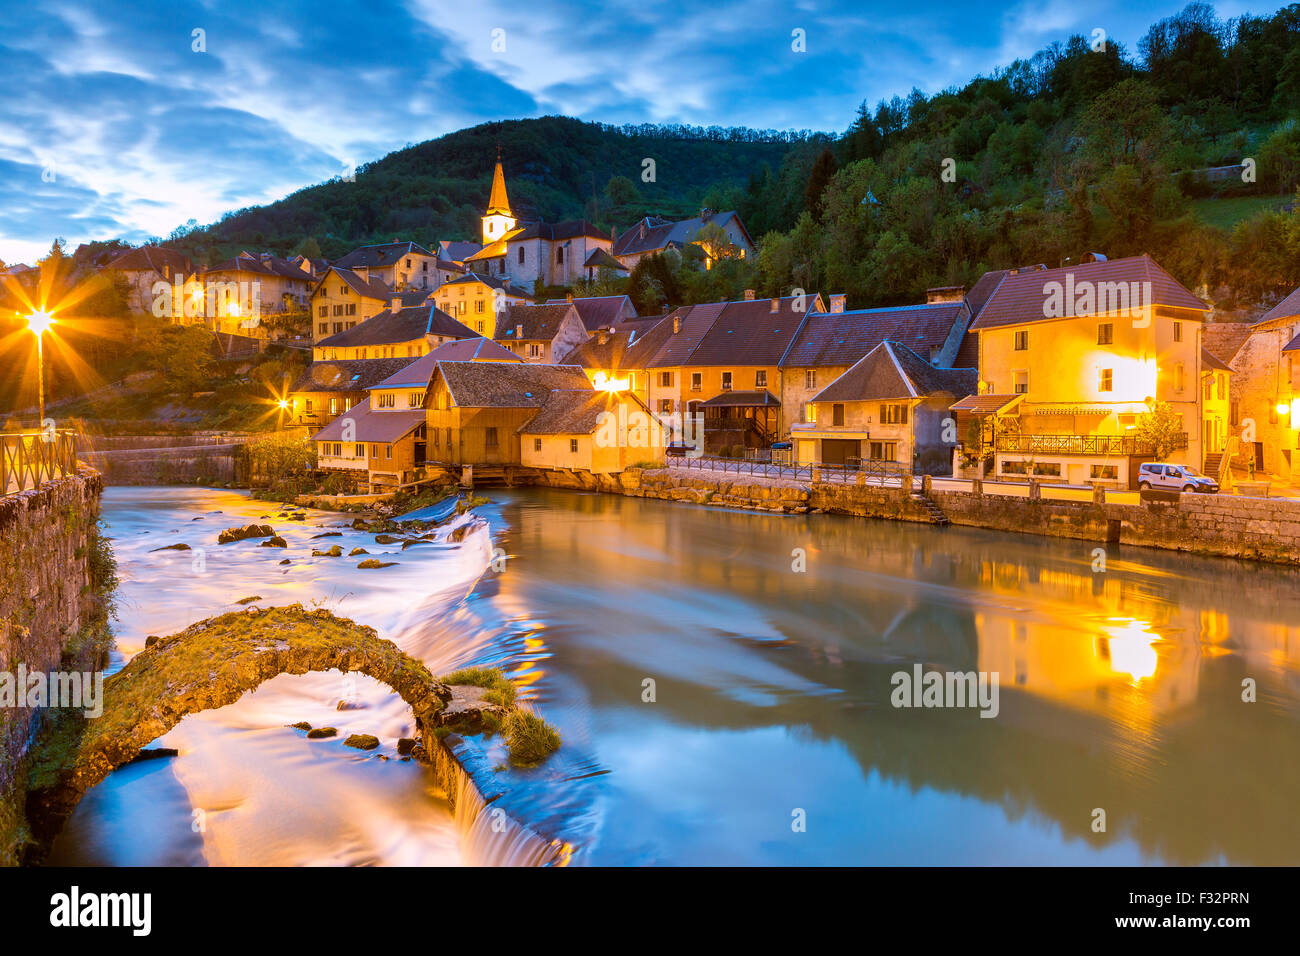 The weir and remains of a medieval bridge on the River Loue, Lods, Franche-Comté, France, Europe. Stock Photo